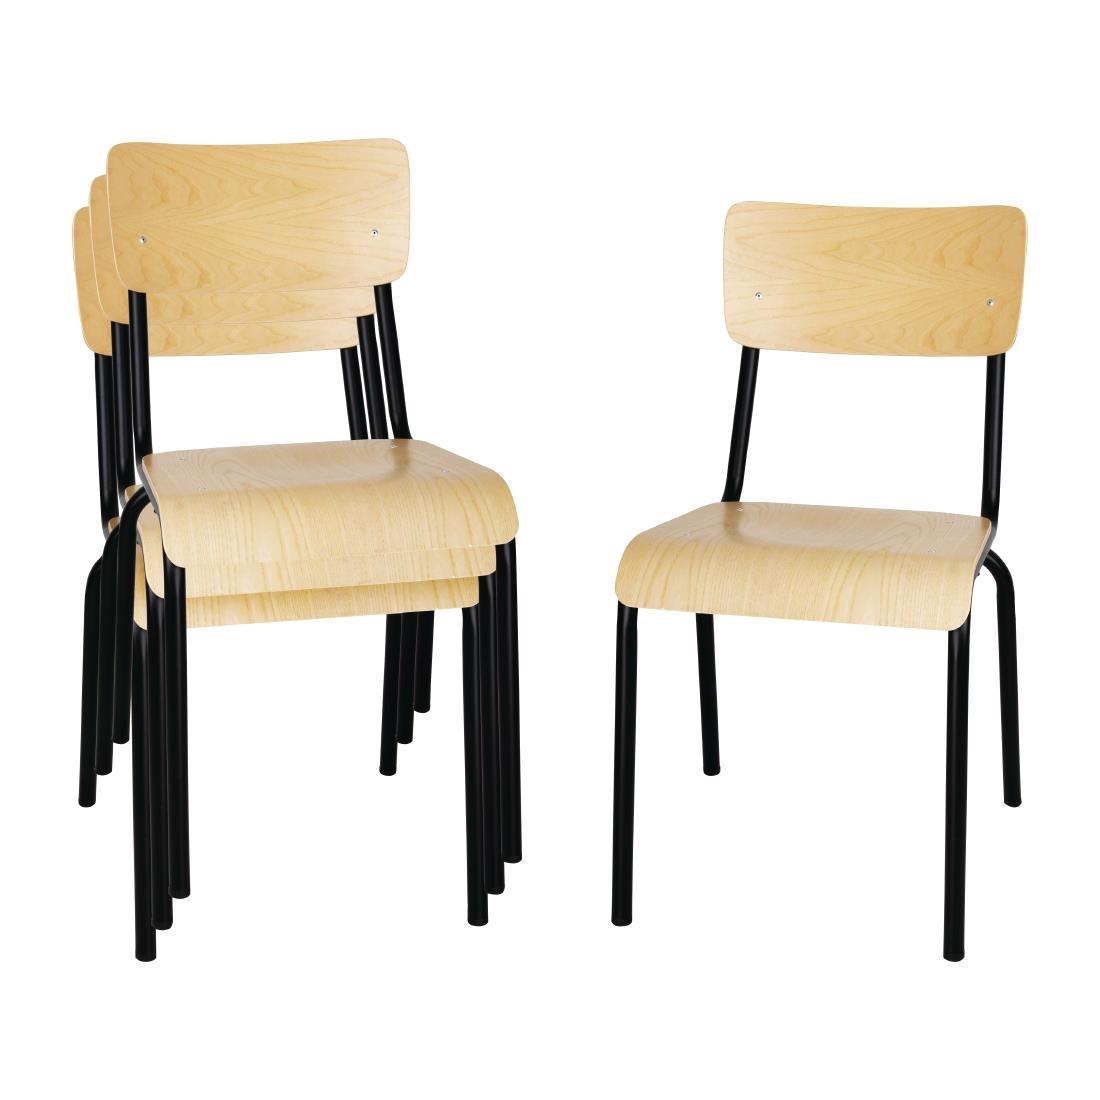 Bolero Cantina Side Chairs with Wooden Seat Pad and Backrest Black (Pack of 4) - FB949  - 6